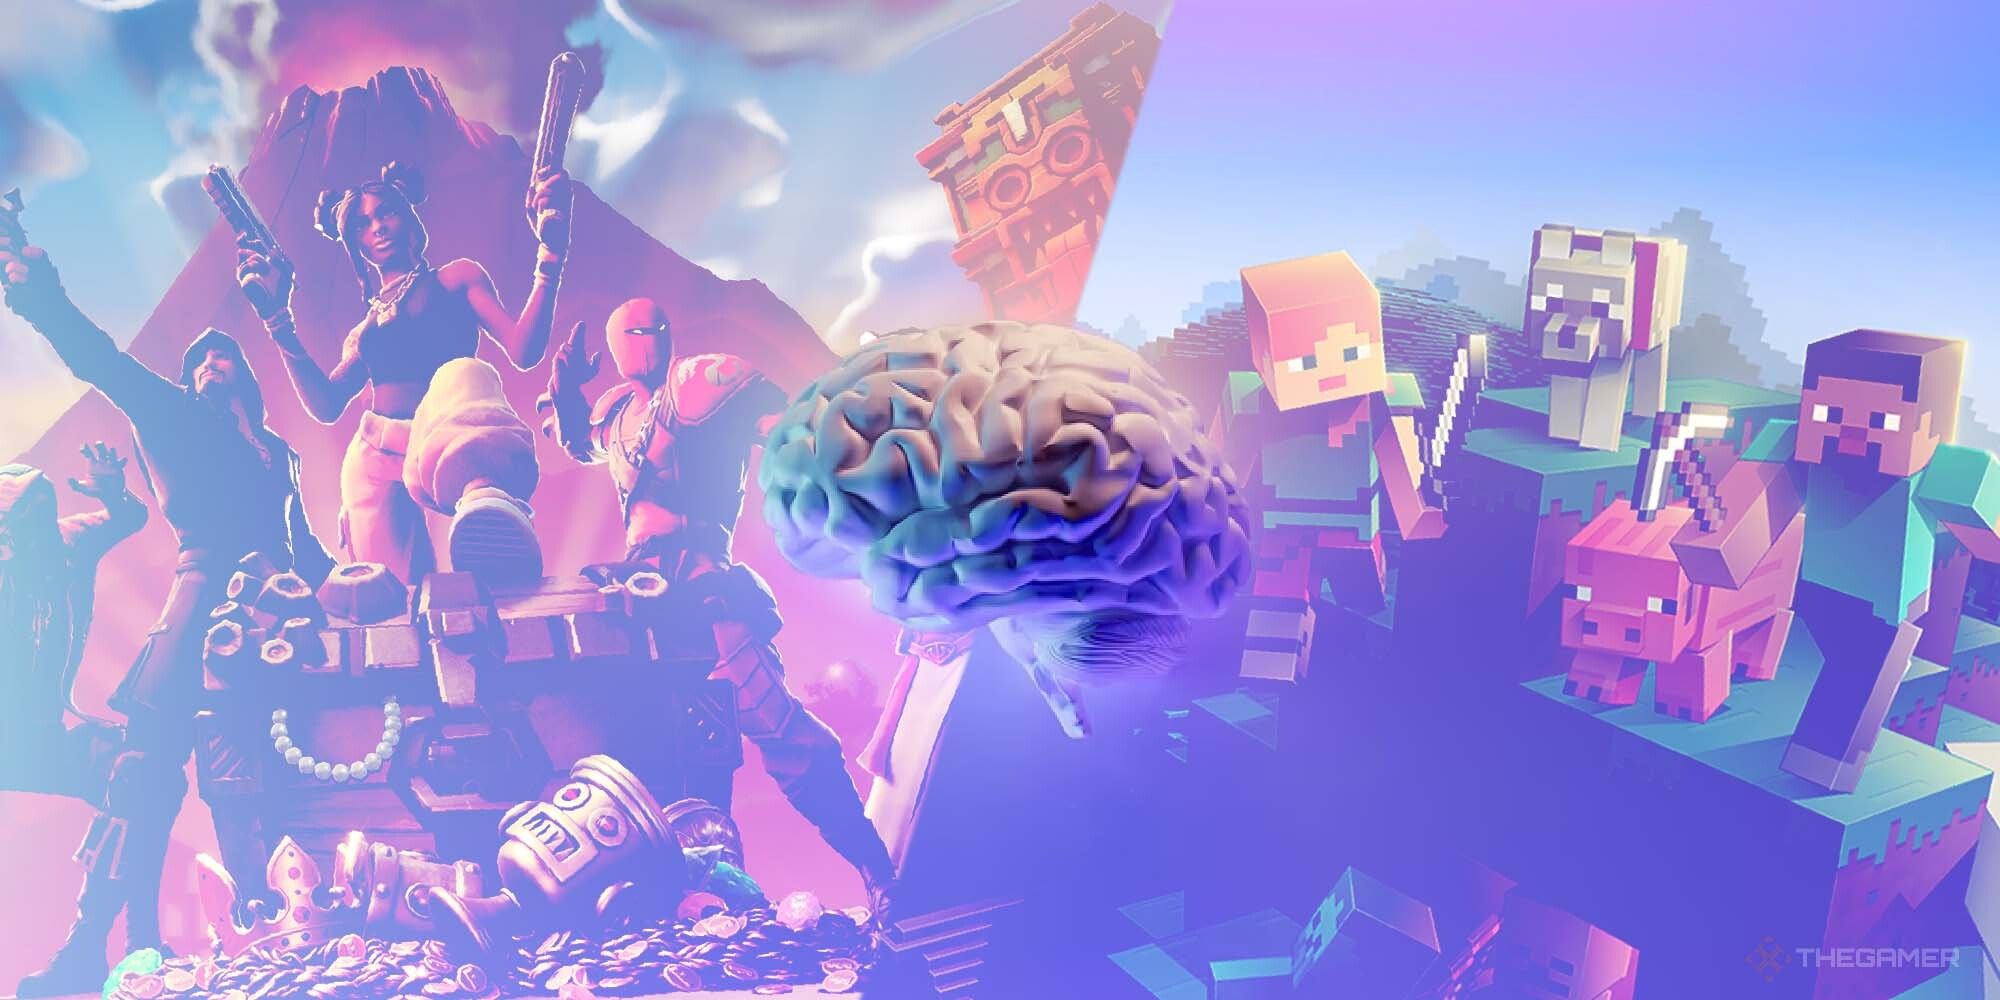 A brain in front of a split image of minecraft and I think fortnite